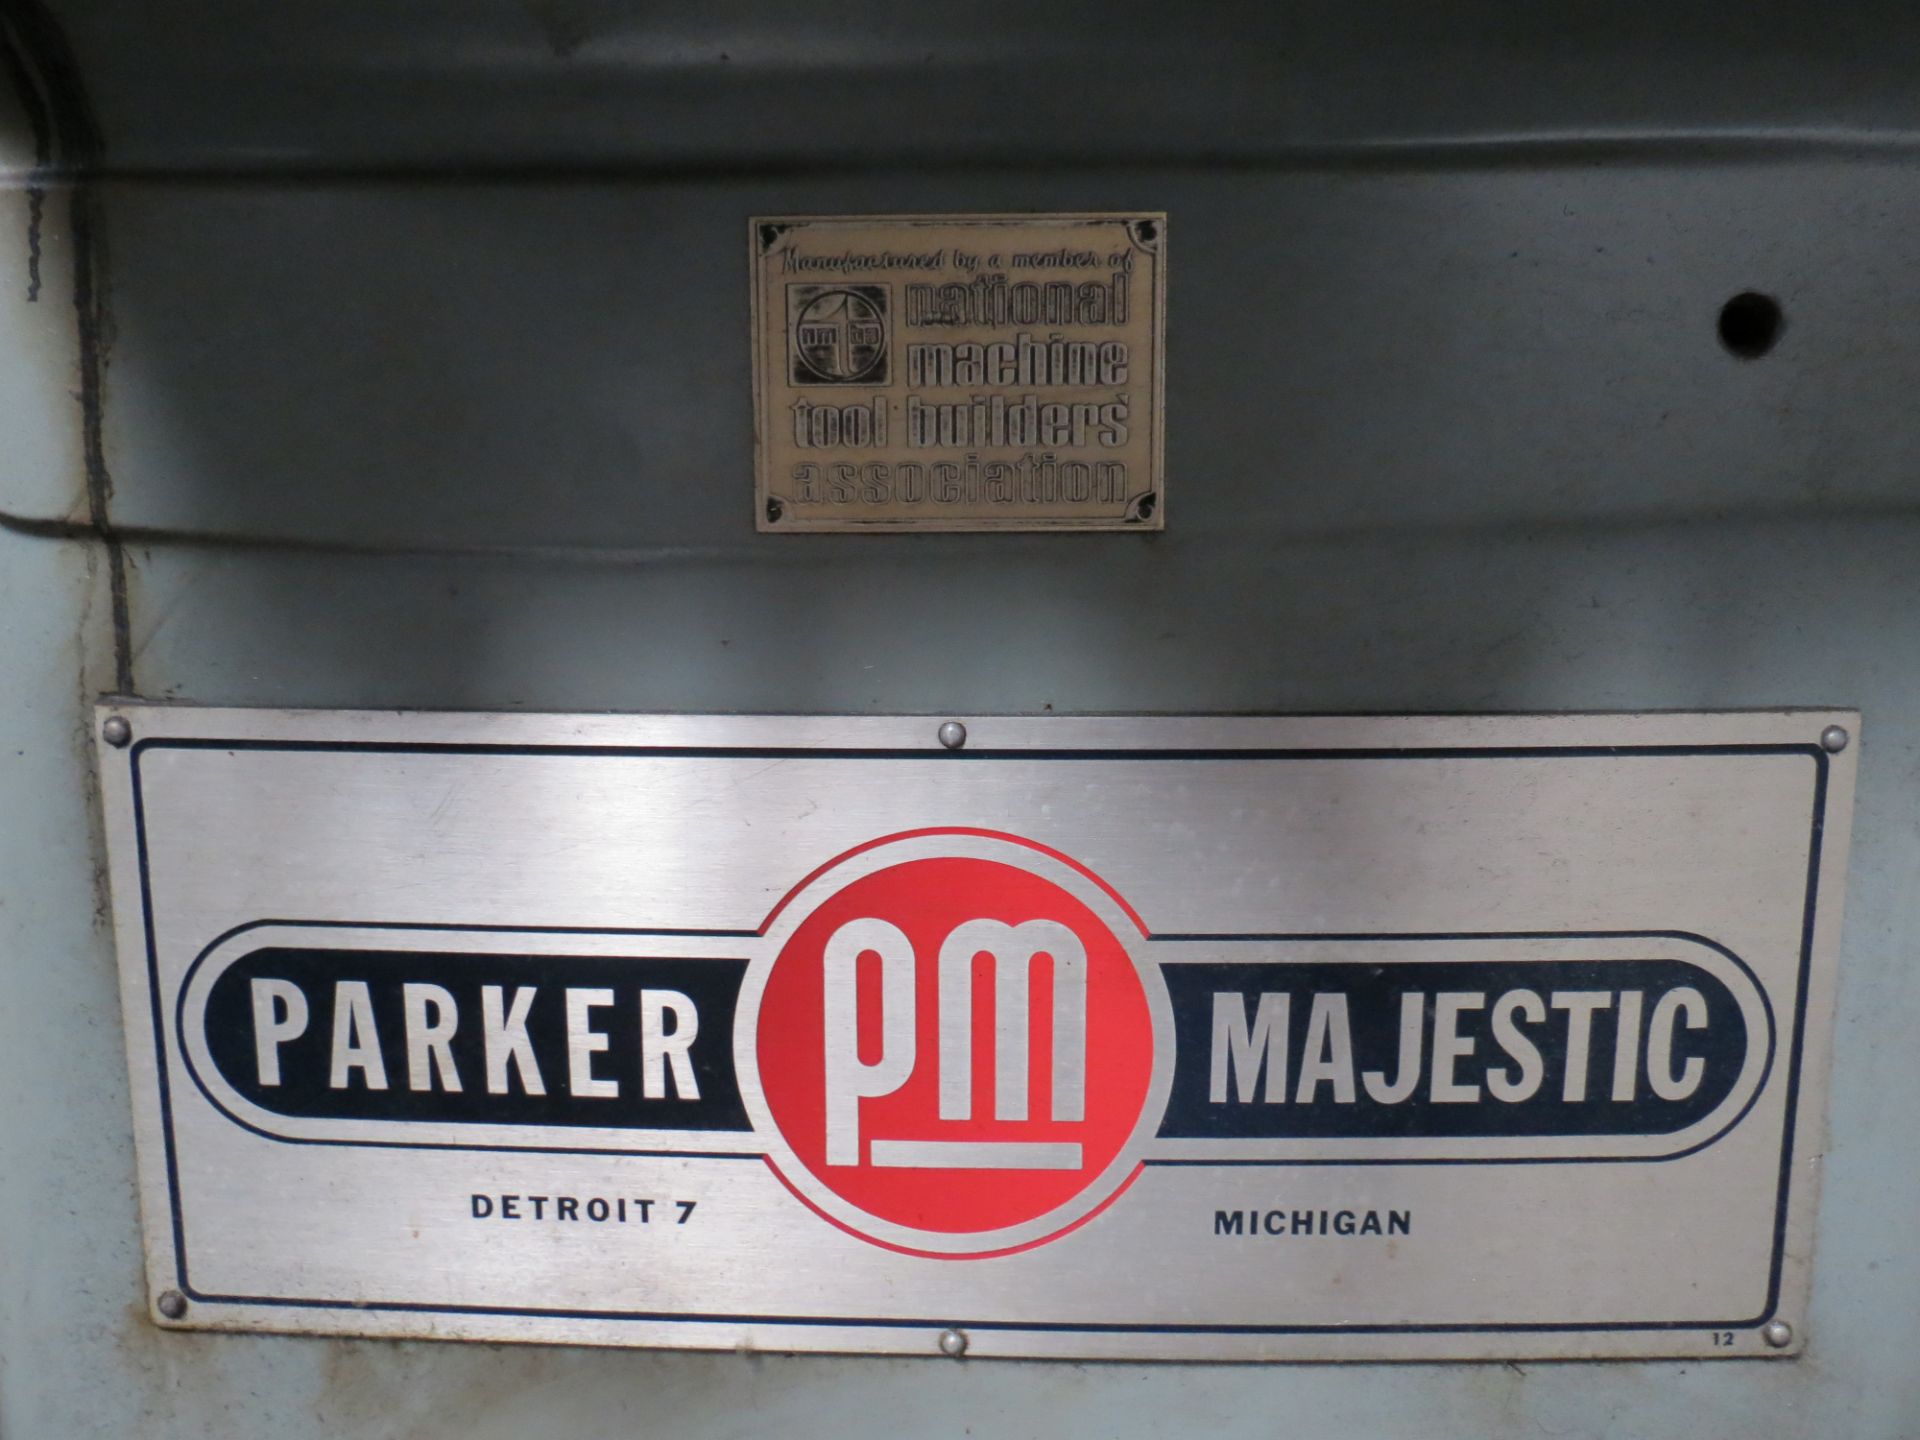 PARKER MAJESTIC SURFACE GRINDER WITH ELECTRO-MATIC CHUCK CONTROL - Image 2 of 8